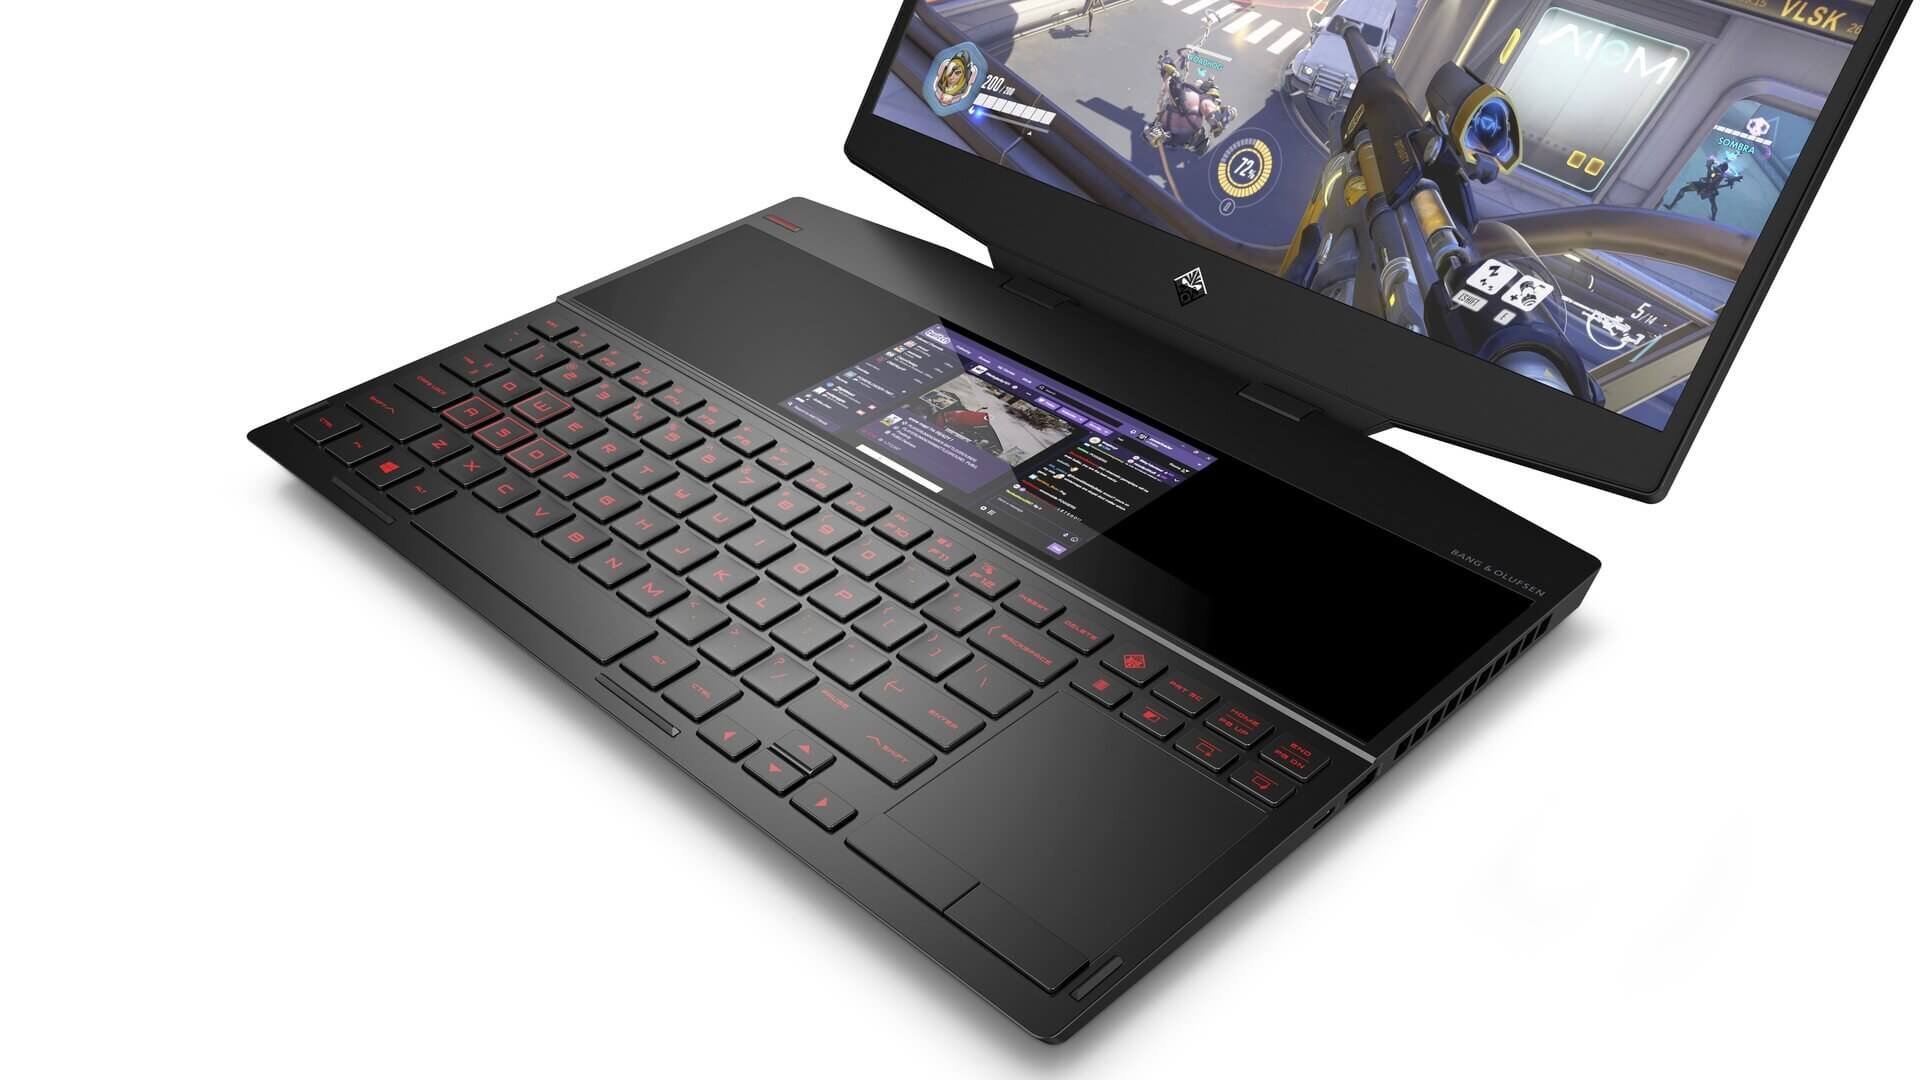 HP unveils the Omen X 2S, a dual-screen gaming laptop